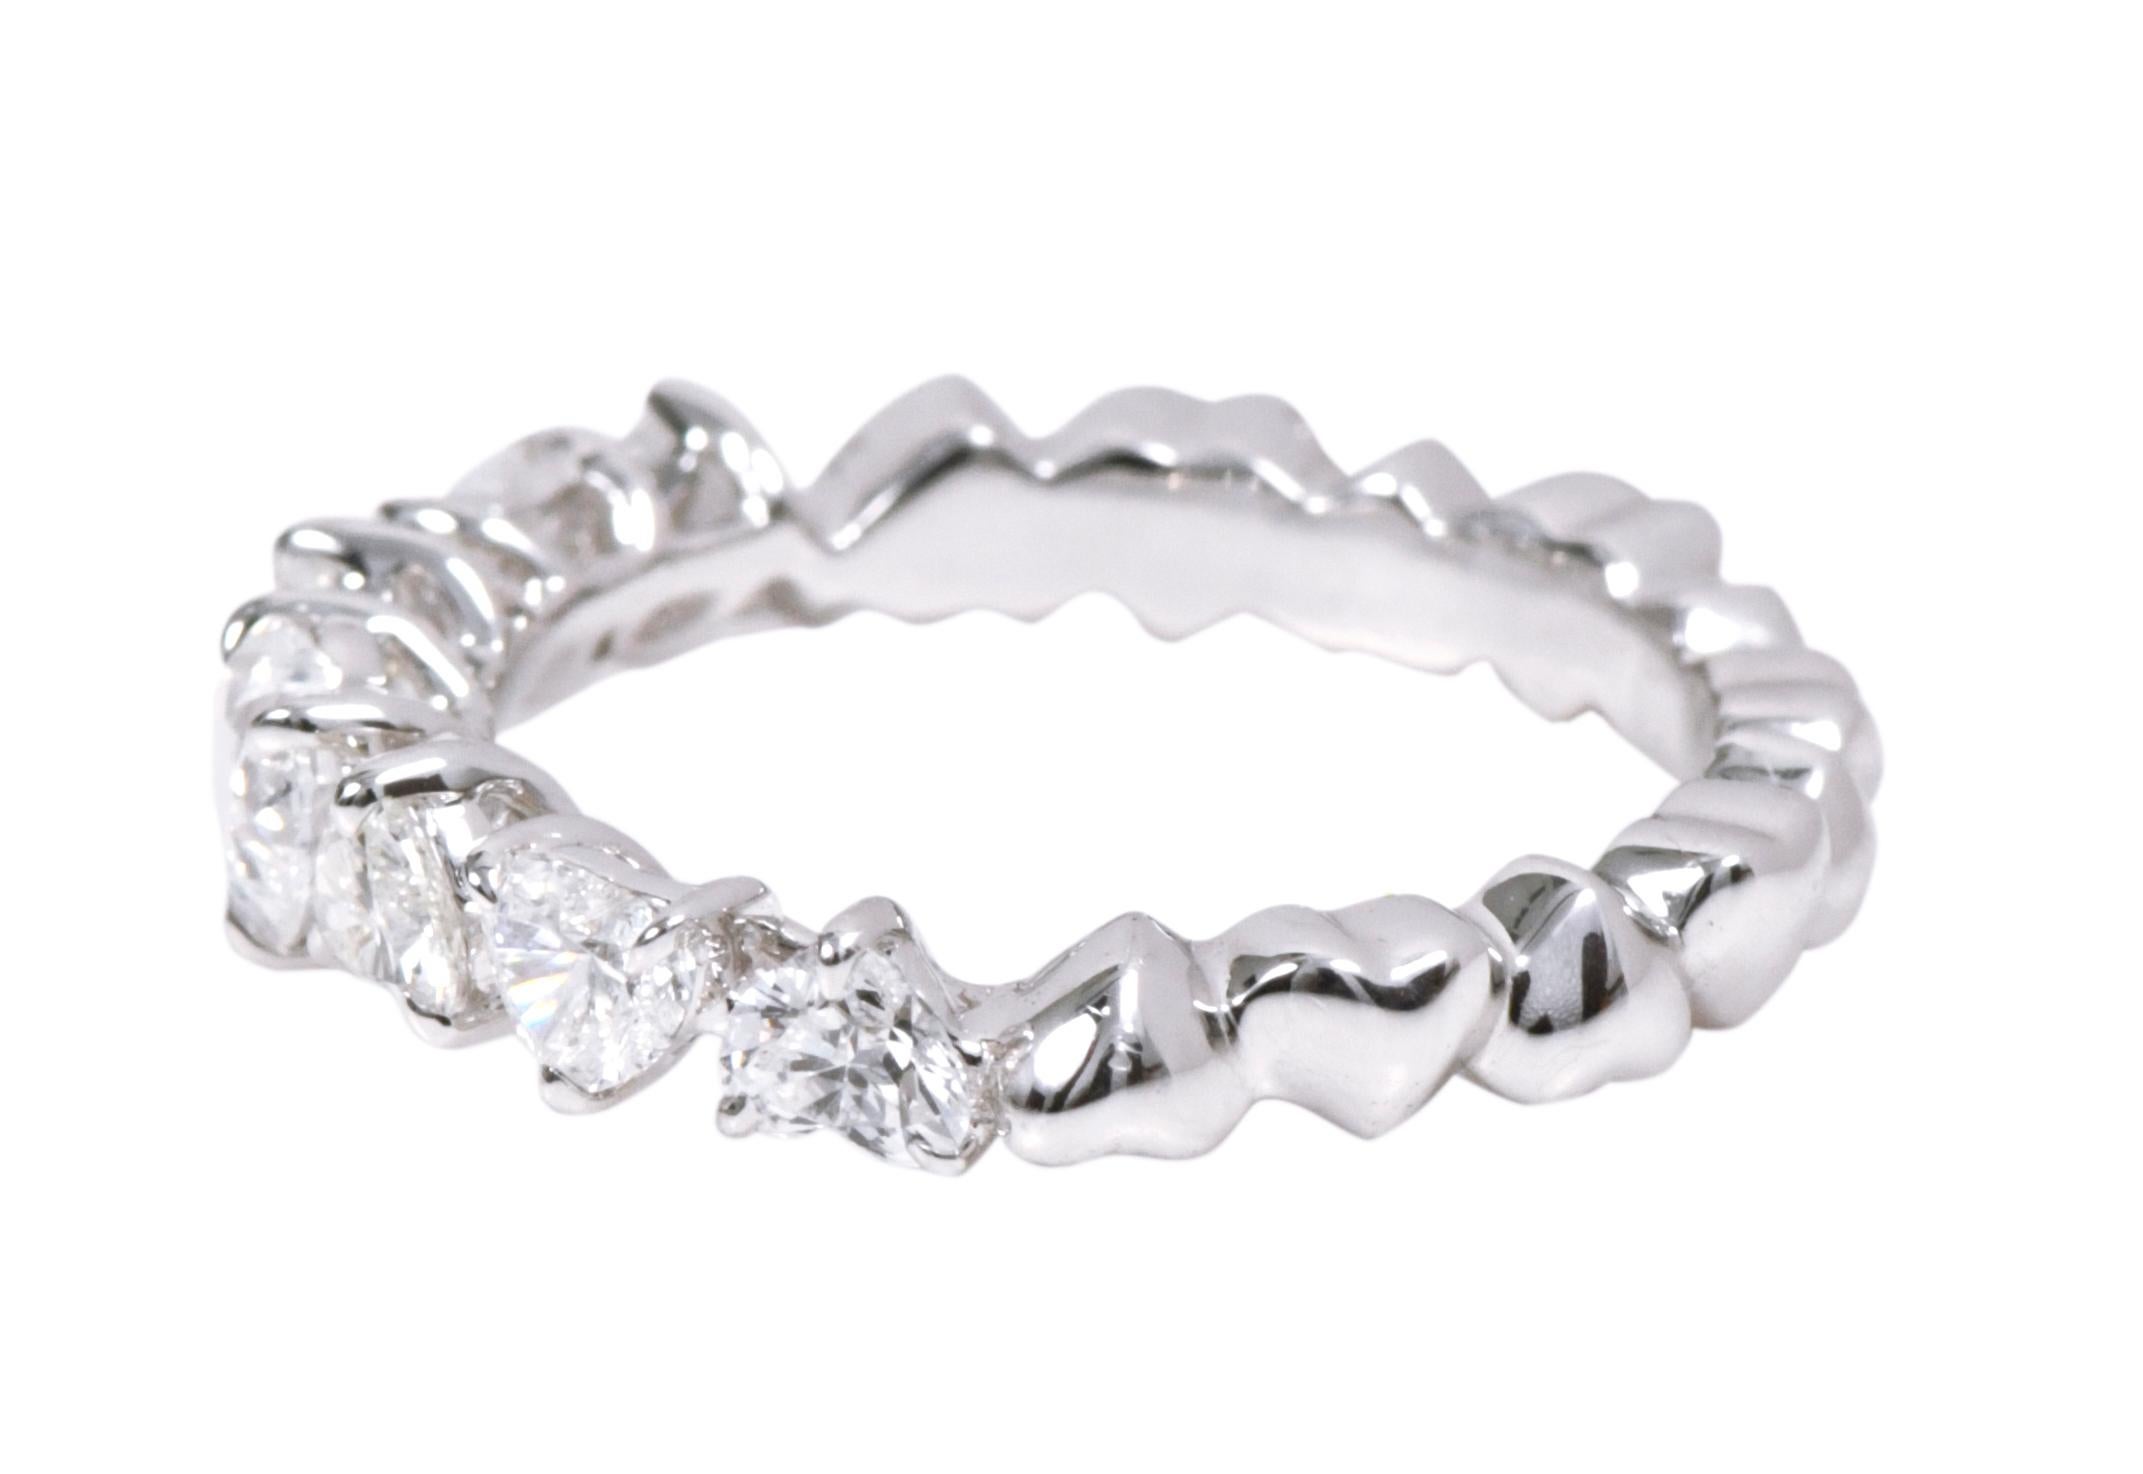 18 Karat White Gold 1.35 Carat Solitaire Heart-Shape Diamond Eternity Band Ring

This eternity heart shaped solitaire diamond half-band is sensational. The solitaire heart shaped diamond in the center highlights the look with the several alternating